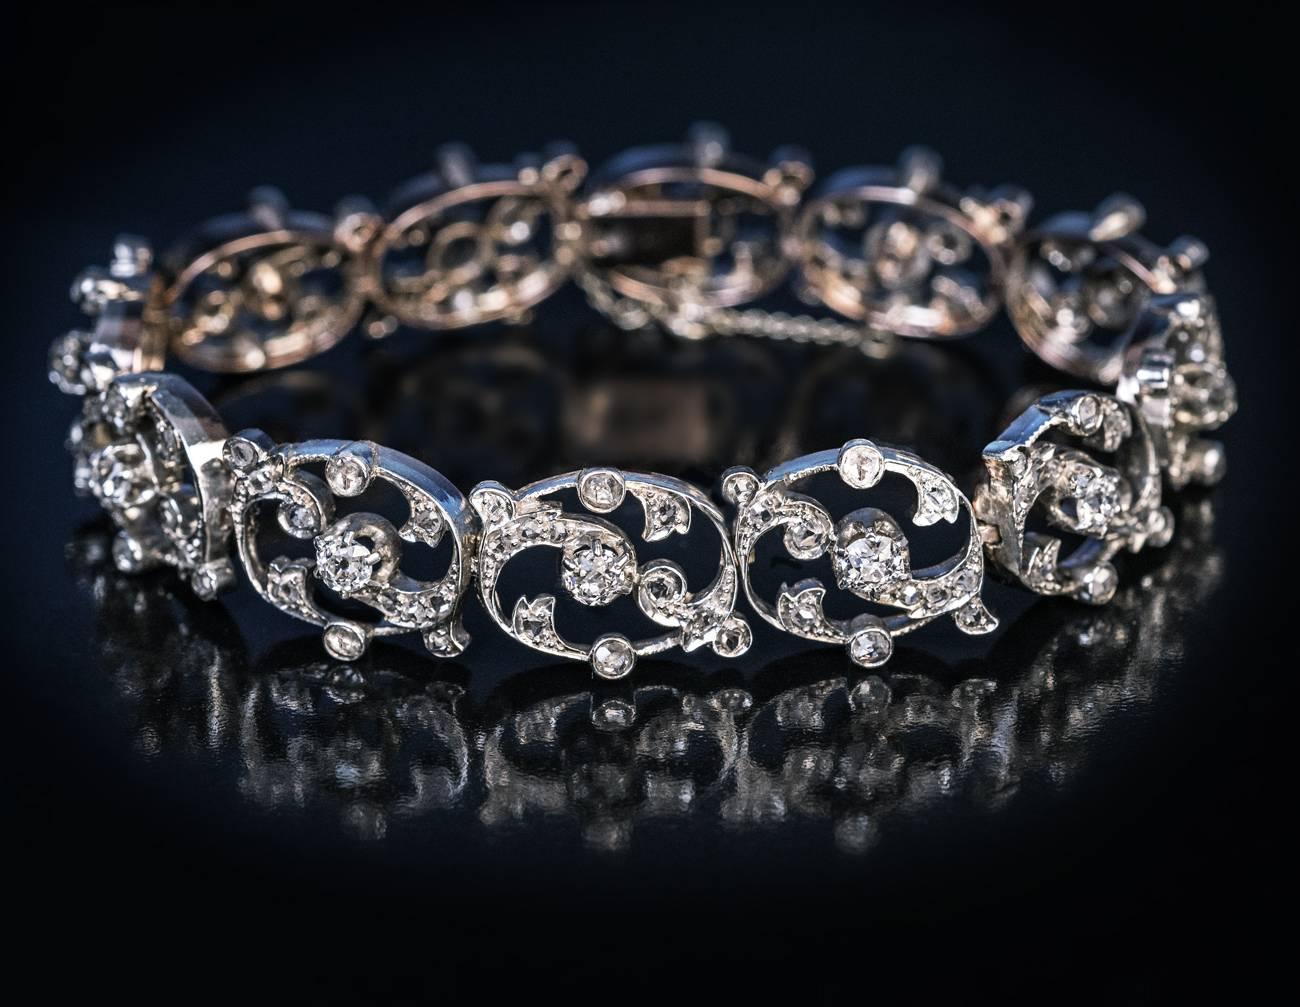 Circa 1890s
An antique French openwork floral motif bracelet is finely handcrafted in silver-topped 18K gold (front – silver, back – gold). The bracelet is embellished with 12 old brilliant cut and 132 rose cut diamonds.

Estimated total diamond